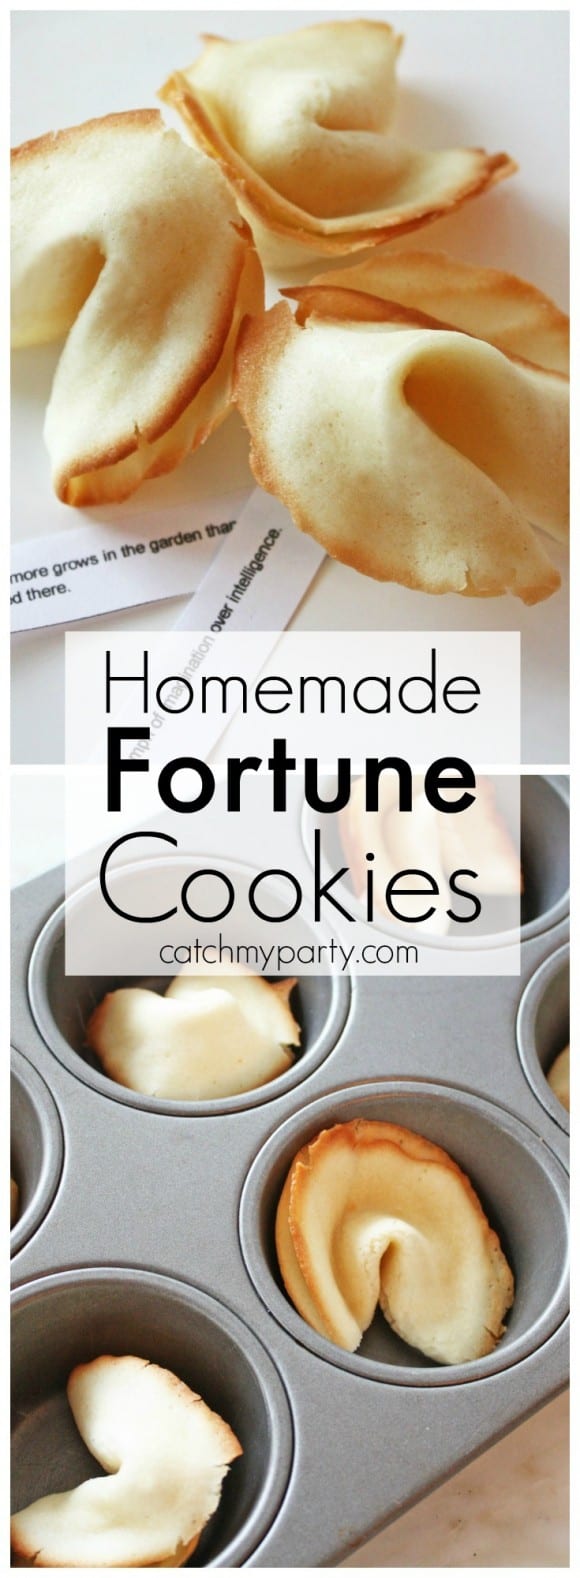 Homemade Fortune Cookie Recipe | CatchMyParty.com